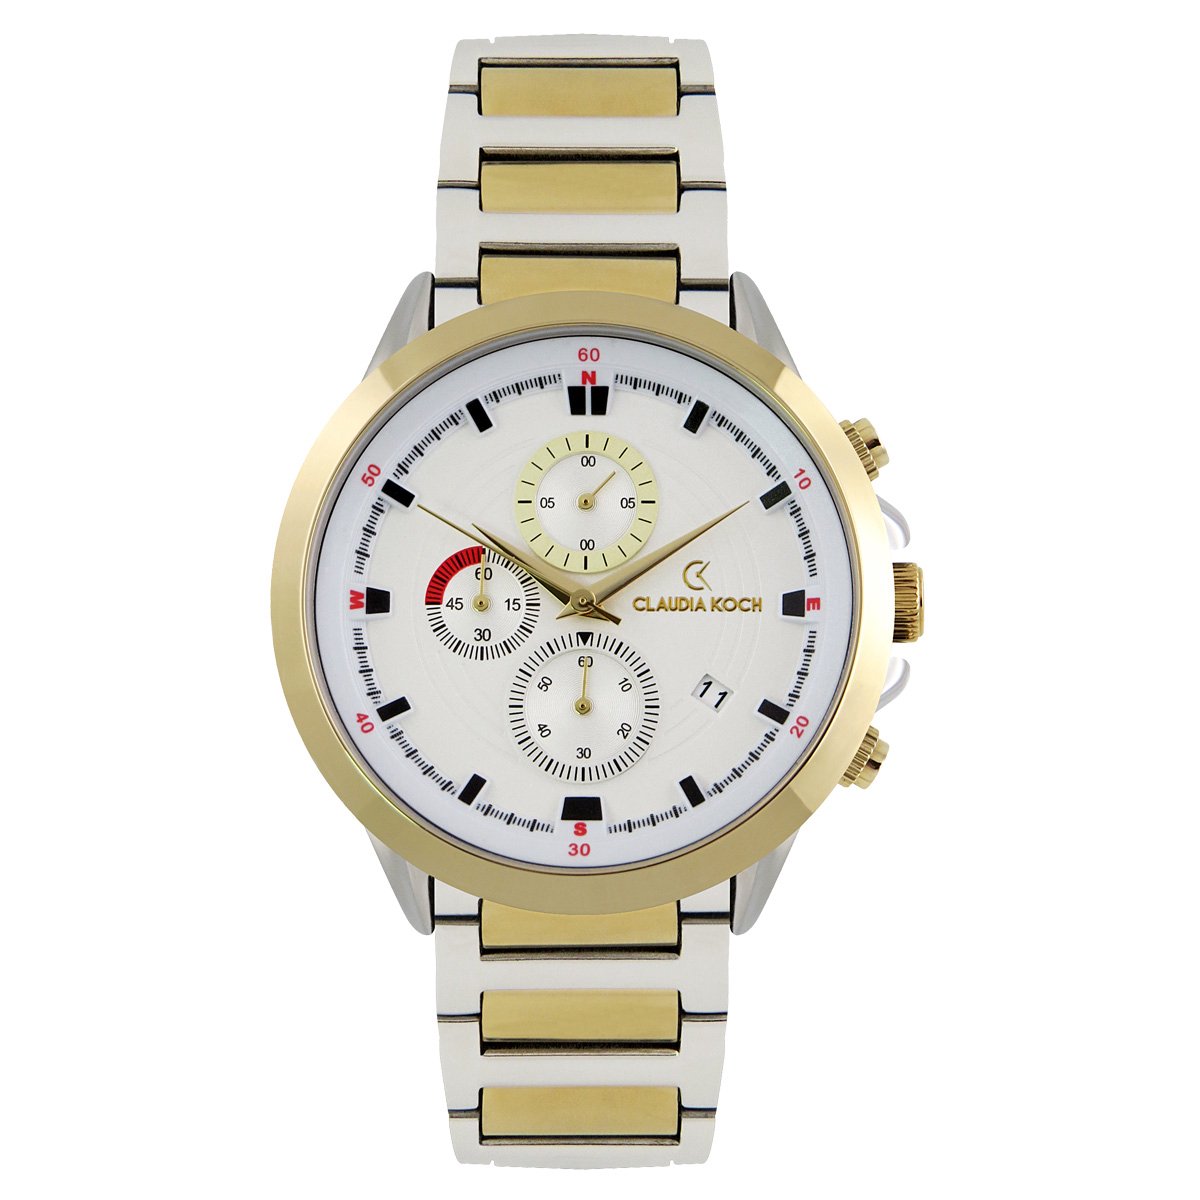 ClaudiaKoch CK 4315 Two-Tone Gold Analog Chronograph Stainless Steel